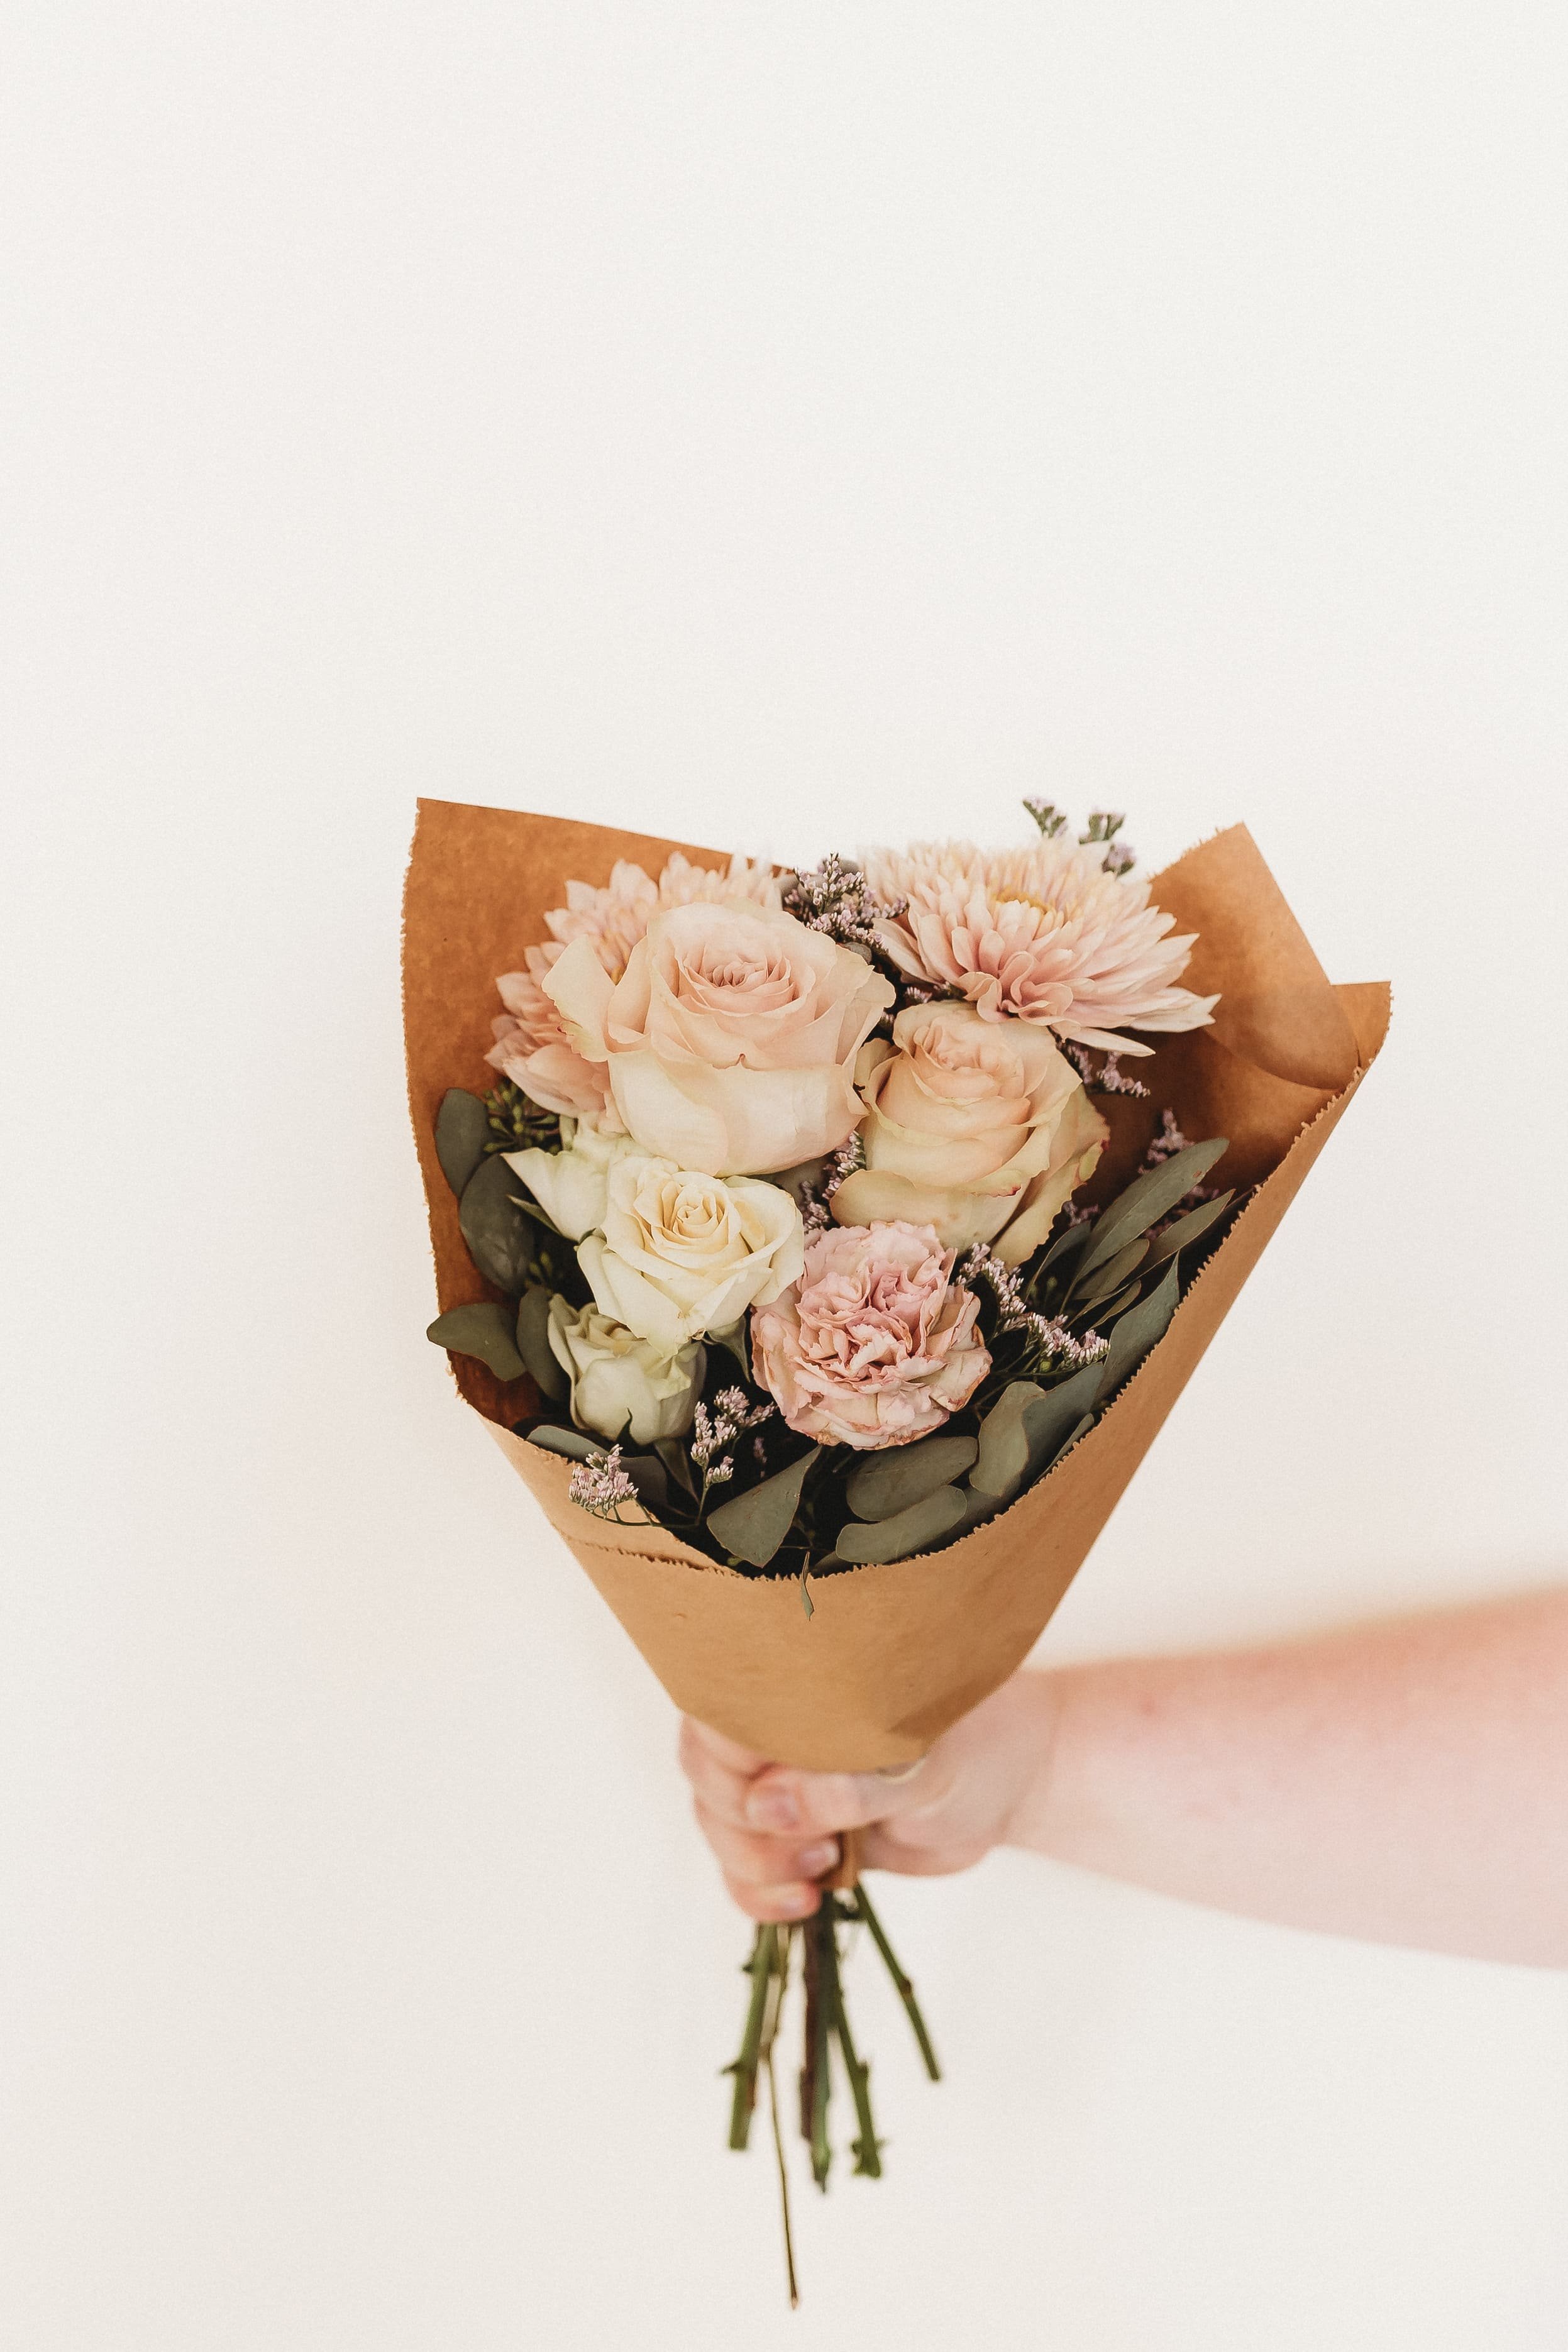  an arm holds out a bouquet of flowers against a white backdrop 